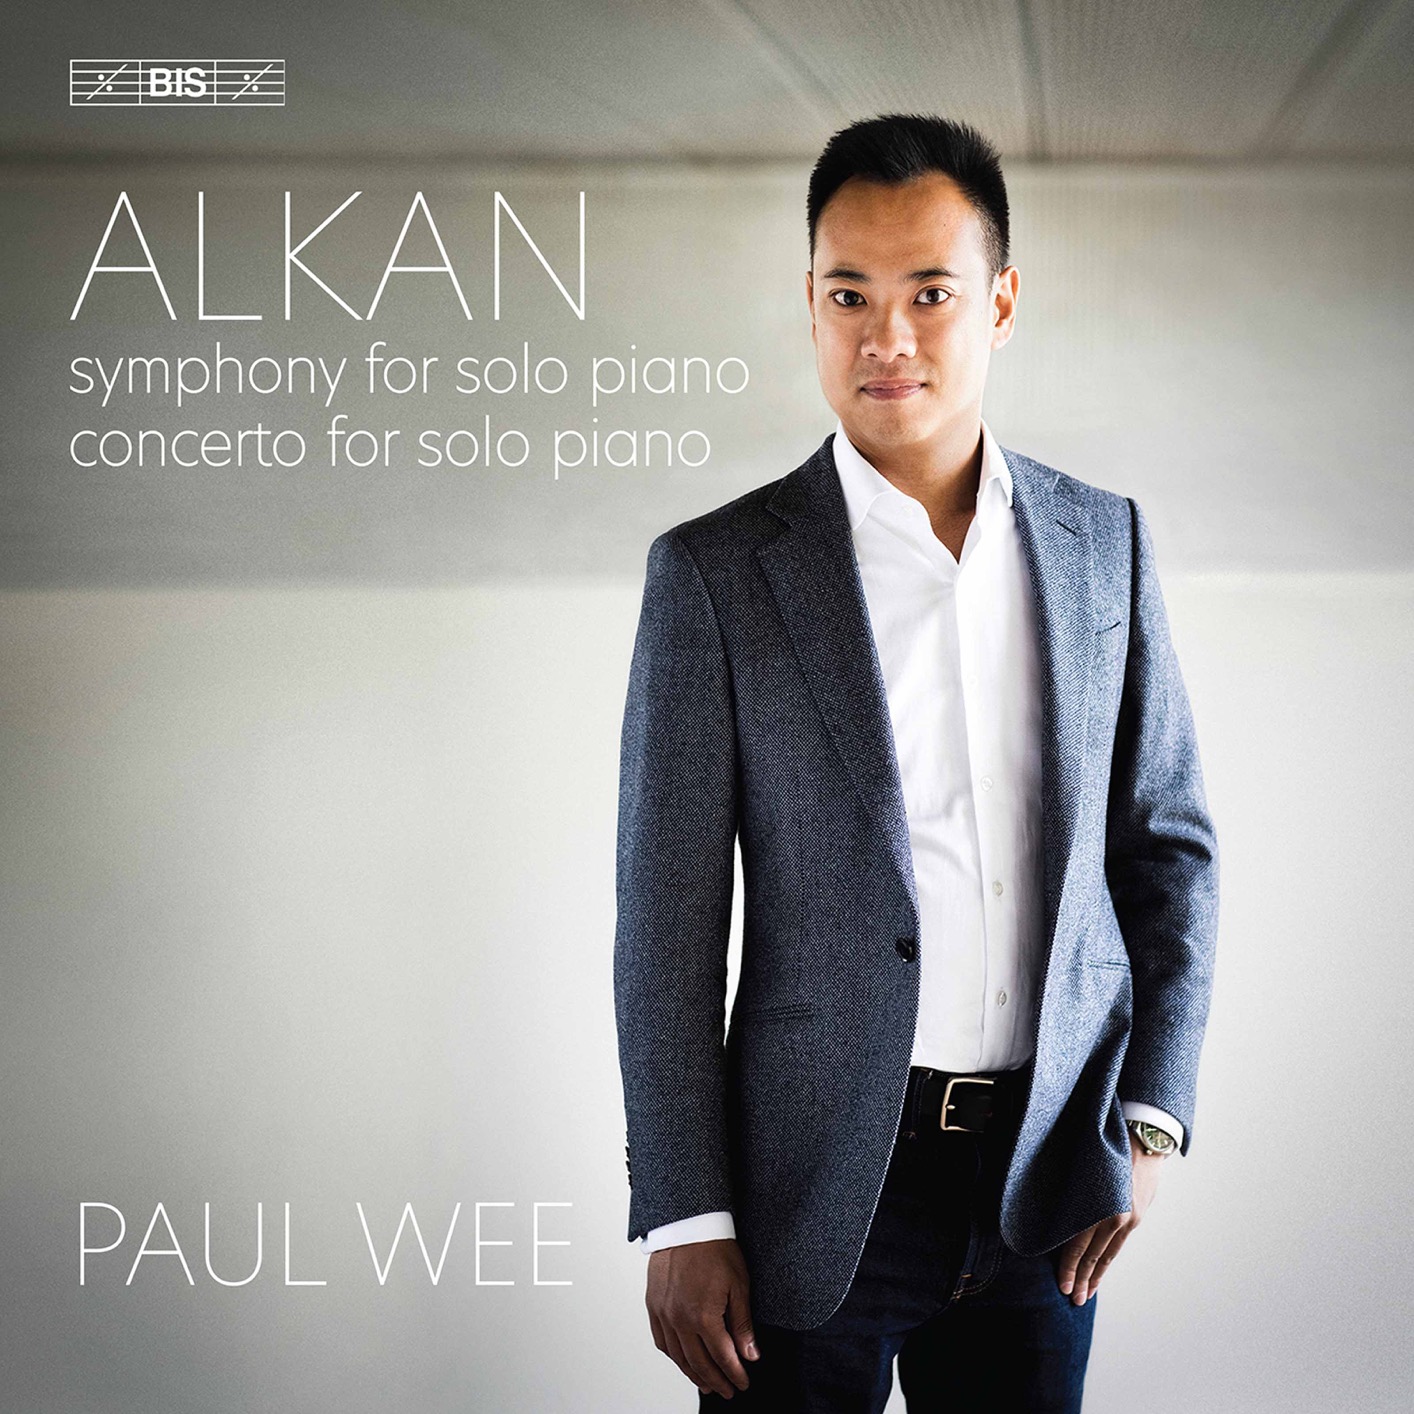 Paul Wee - Alkan: Symphony for Solo Piano & Concerto for Solo Piano (2019) [FLAC 24bit/192kHz]